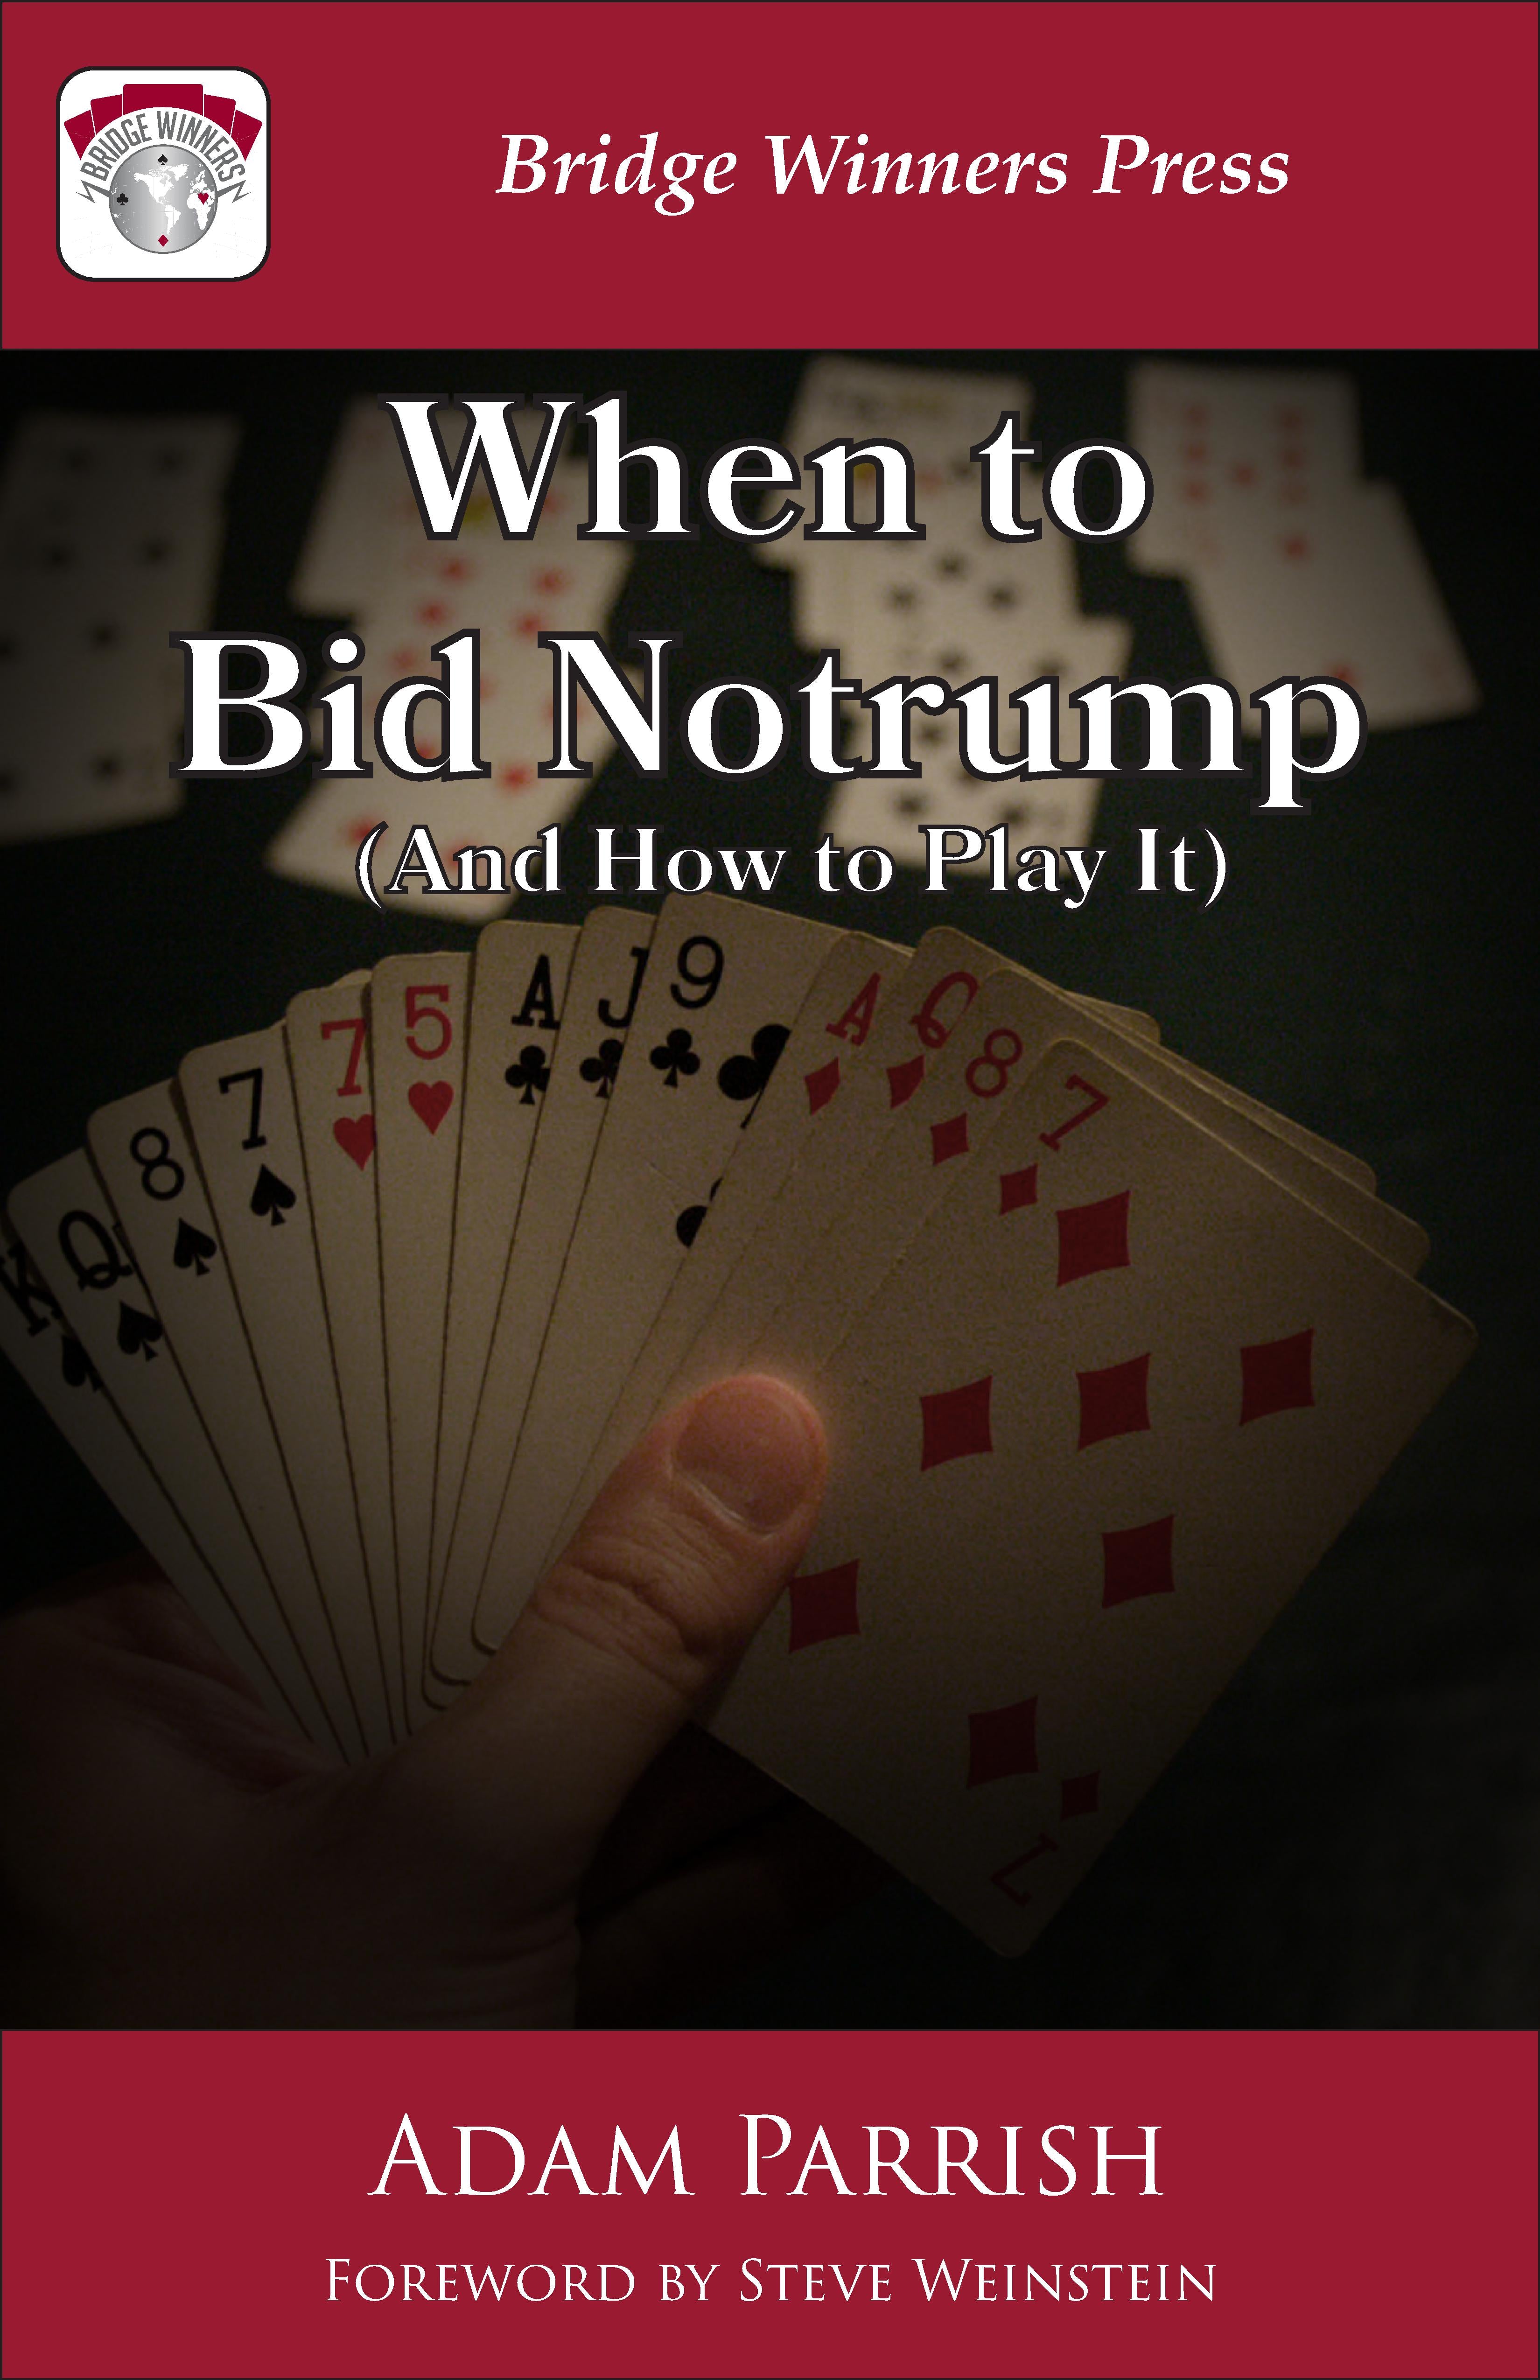 When to Bid Notrump (And How to Play It)